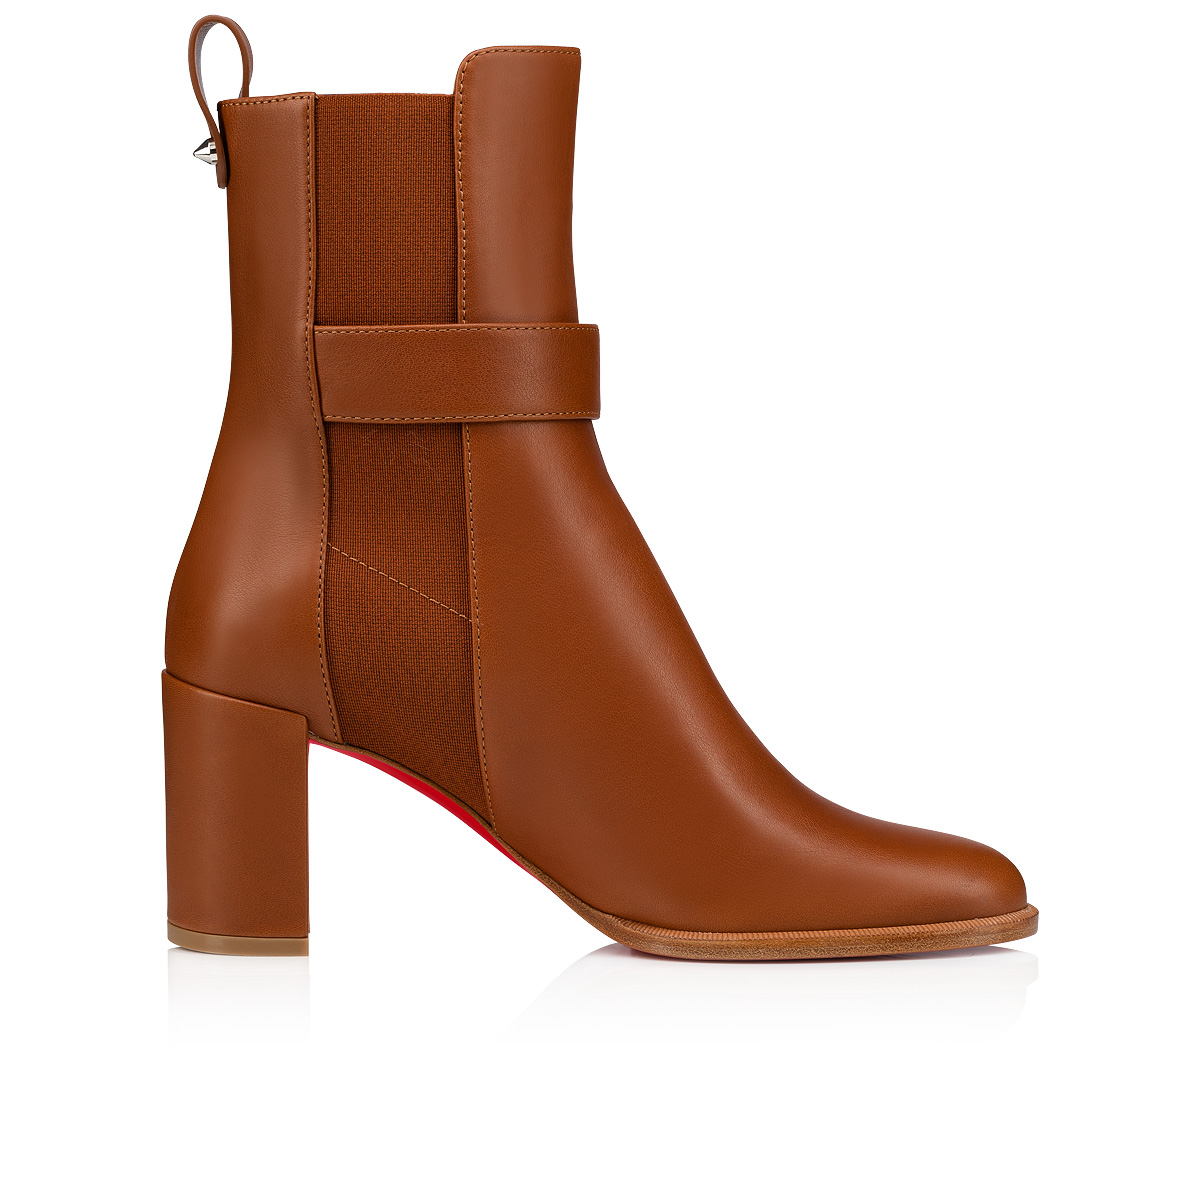 Christian Louboutin, Shoes, Nwb Christian Louboutin Glory Leather Red Sole  Chelsea Booties Chestnut Brown 38